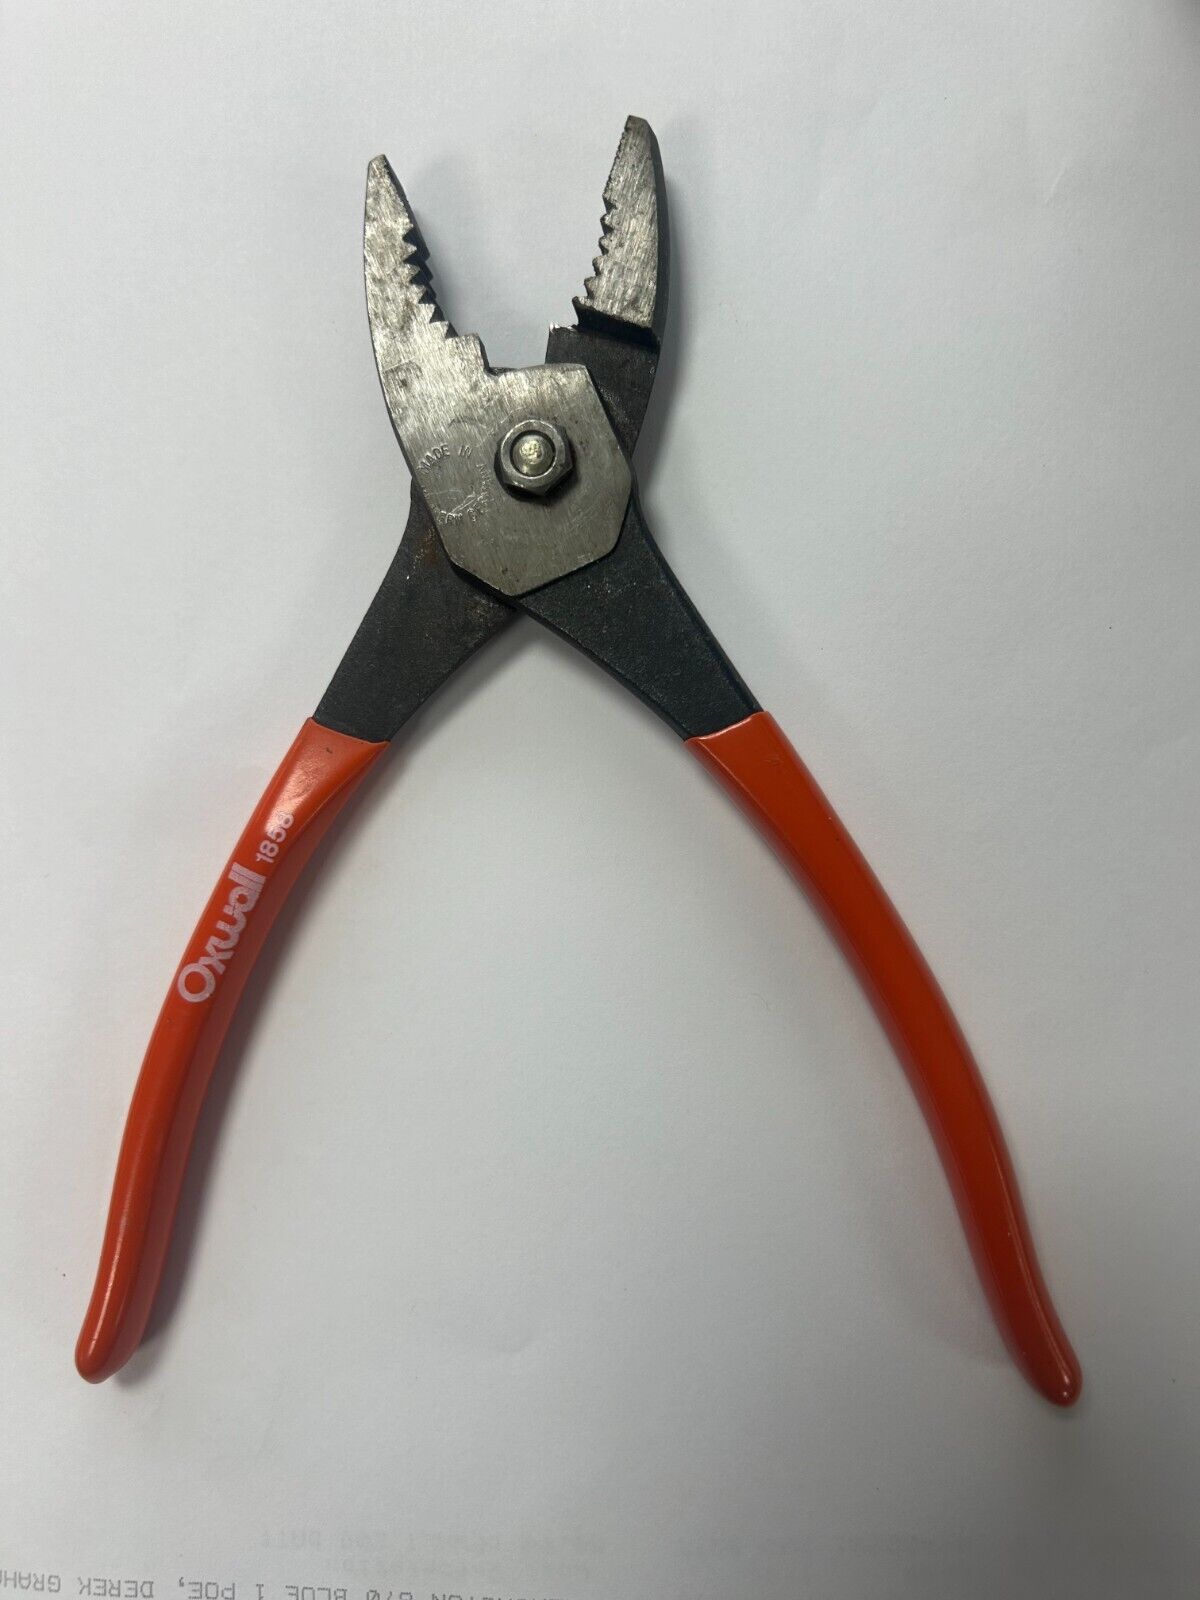 pliers made in west germany